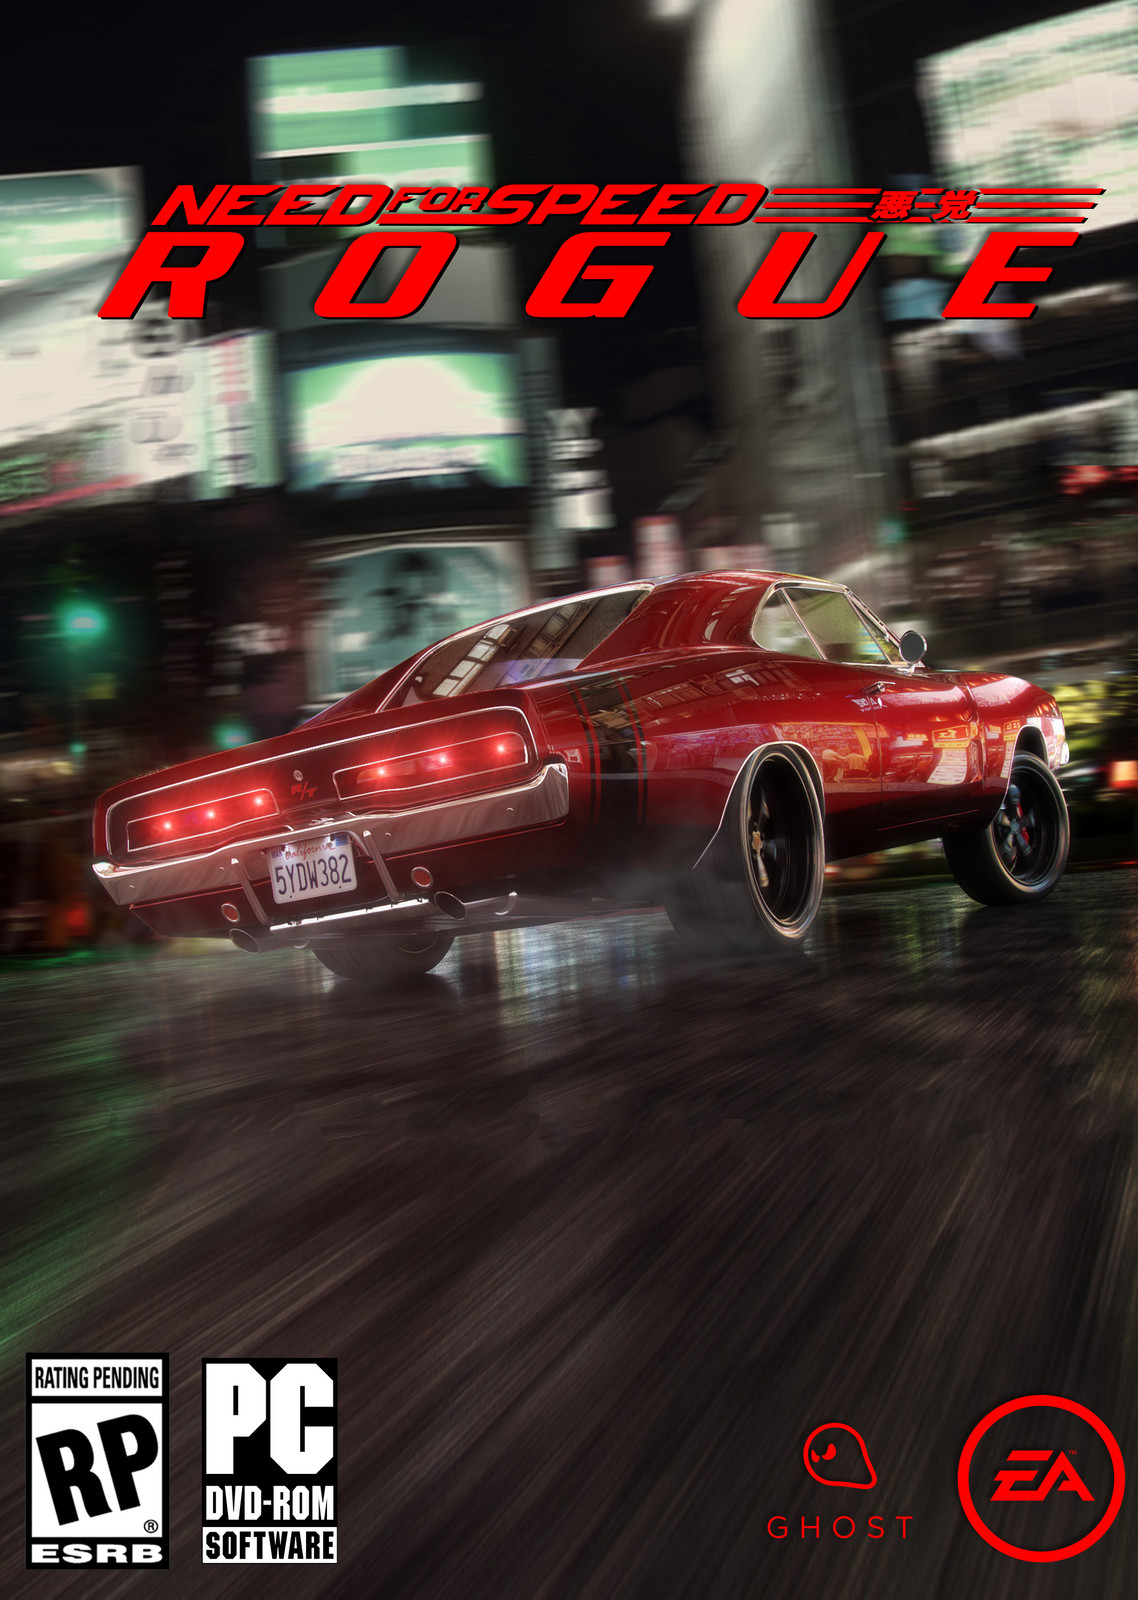 Need for Speed: Rogue (Original Idea, the image was rendered in Corona by Togrul Hasanov)